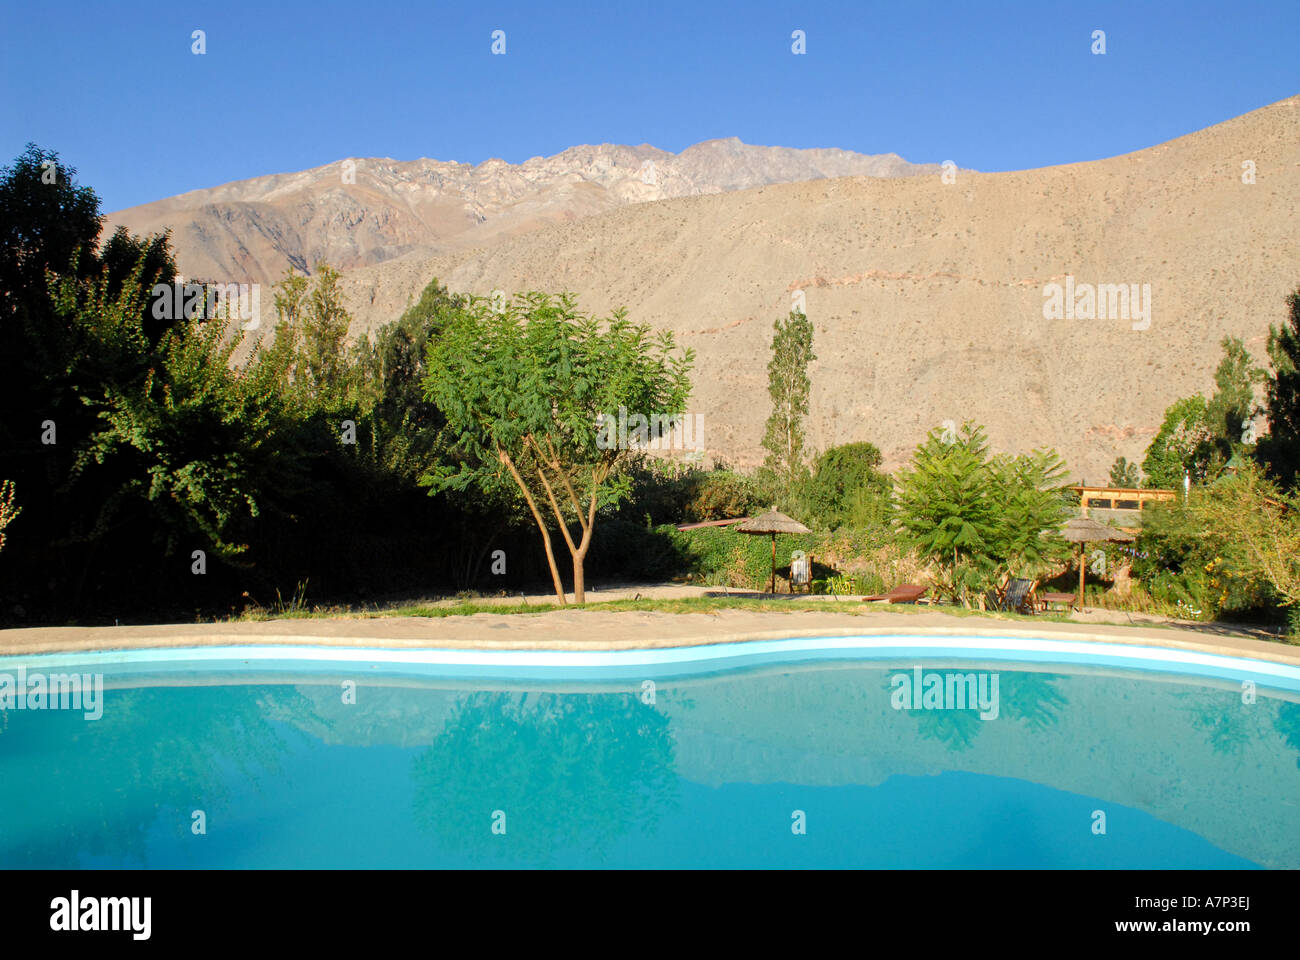 Swimming pool and mountains Valley elqui Chile Stock Photo